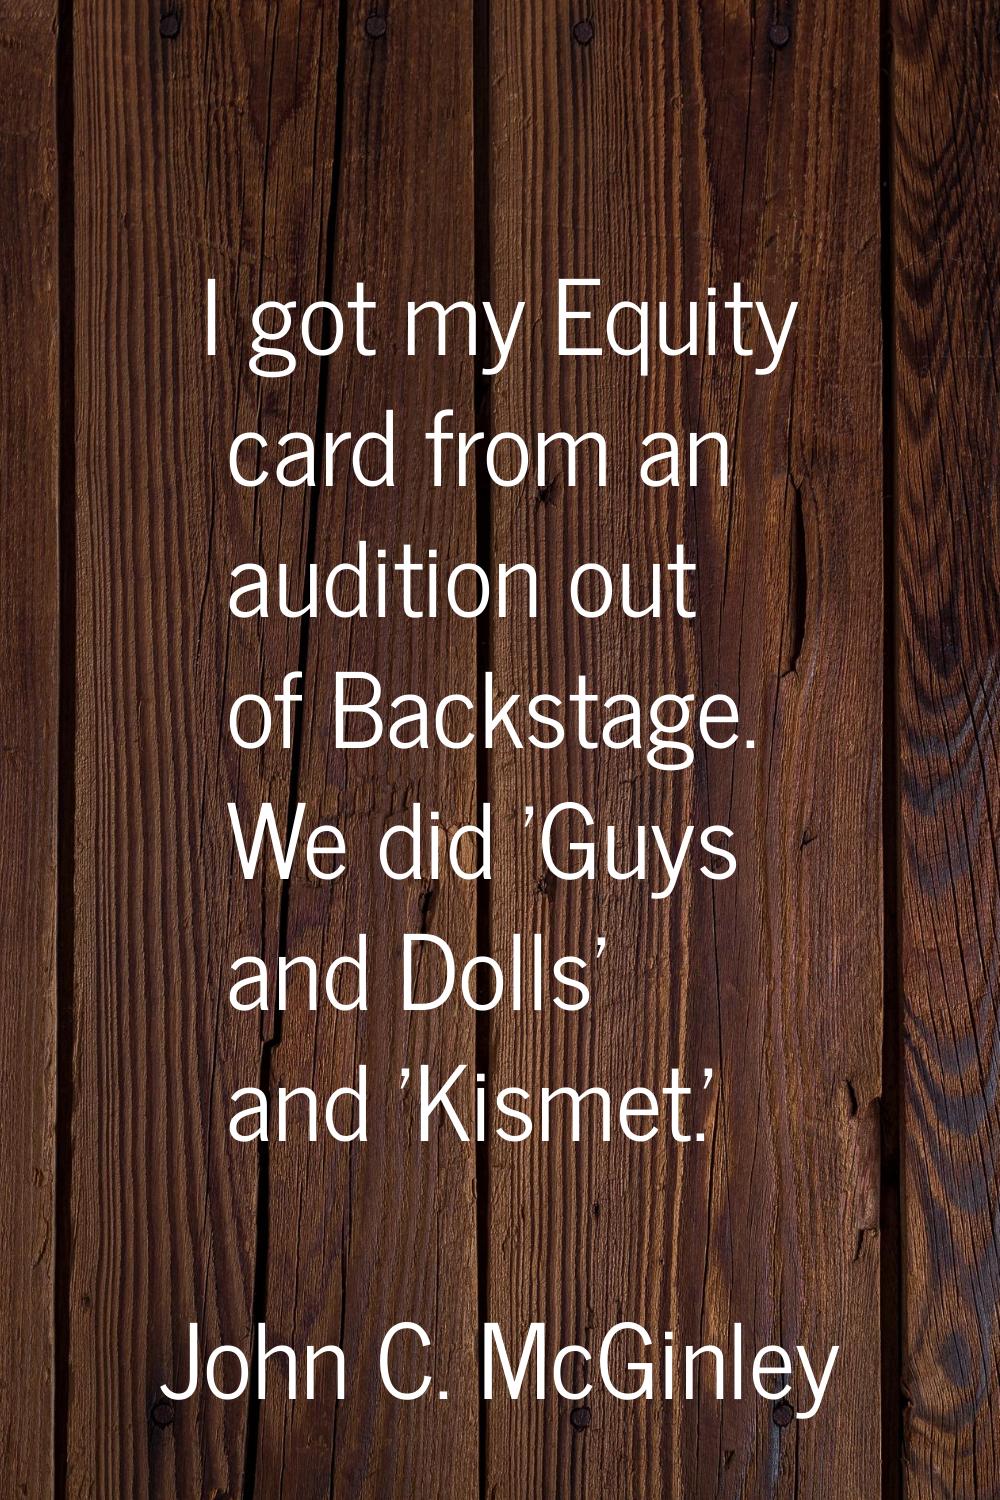 I got my Equity card from an audition out of Backstage. We did 'Guys and Dolls' and 'Kismet.'